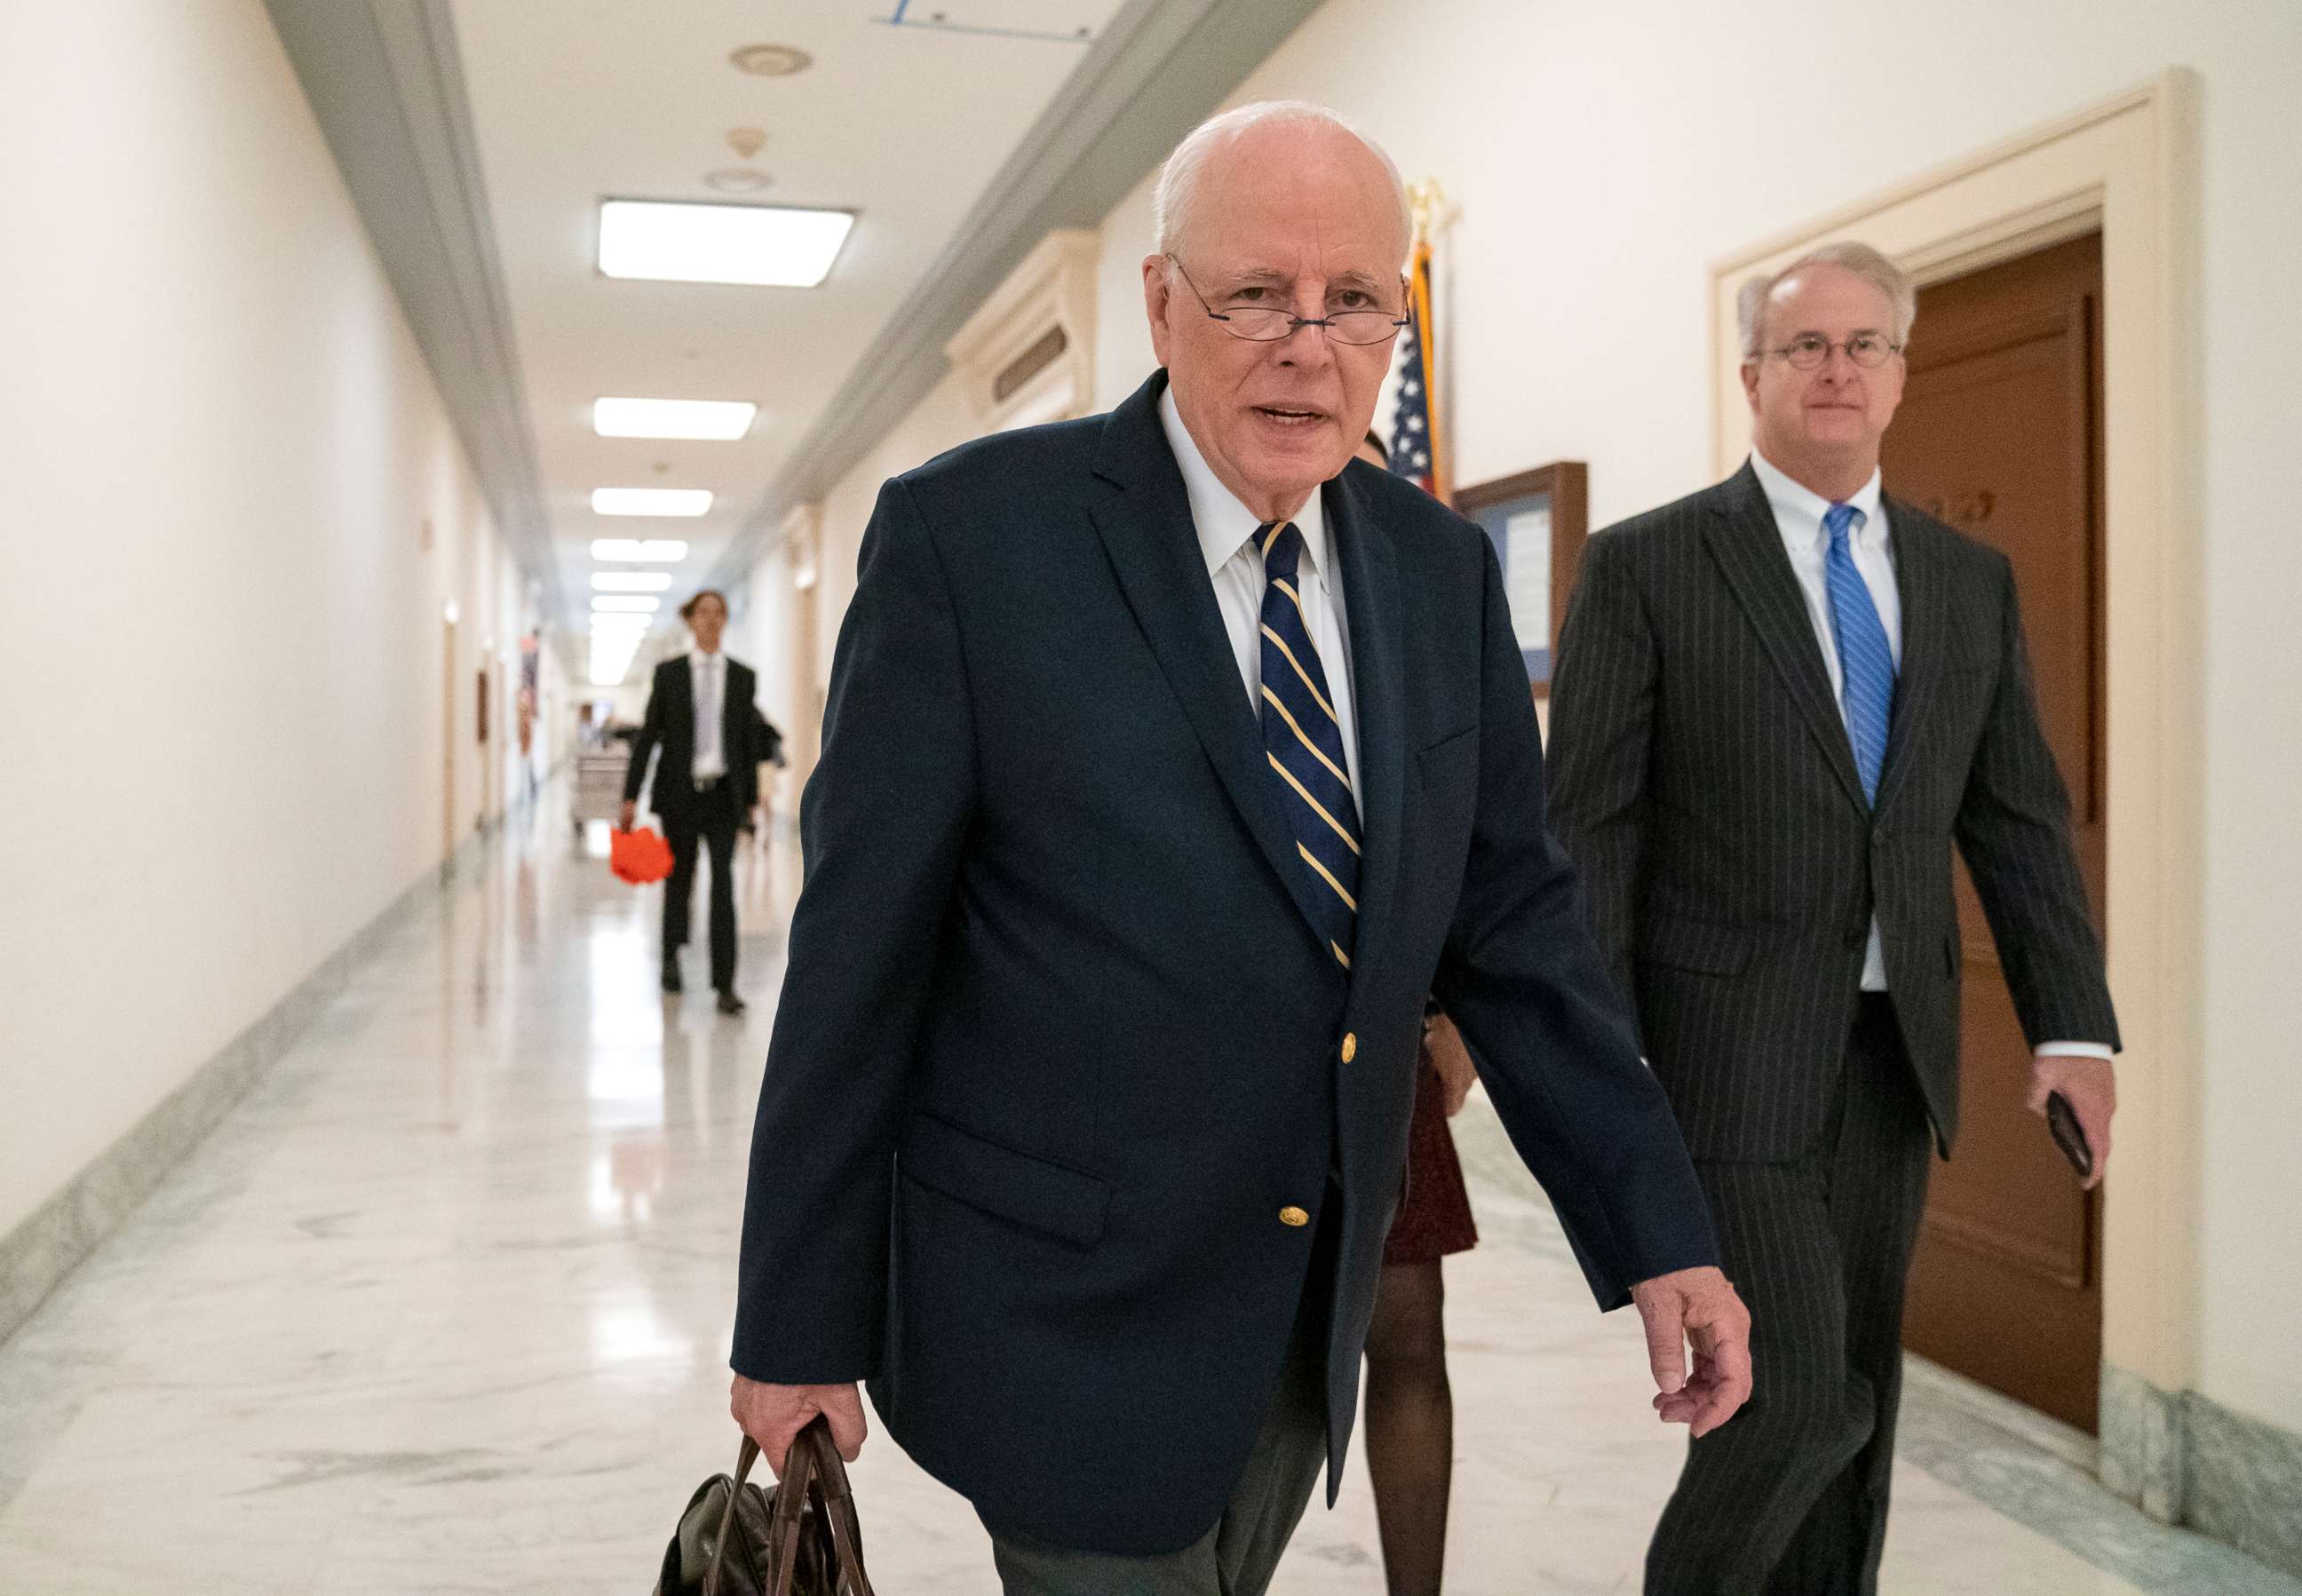 PHOTO: Former White House Counsel John Dean arrives to testify before the House Judiciary Committee on Capitol Hill in Washington, June 10, 2019.